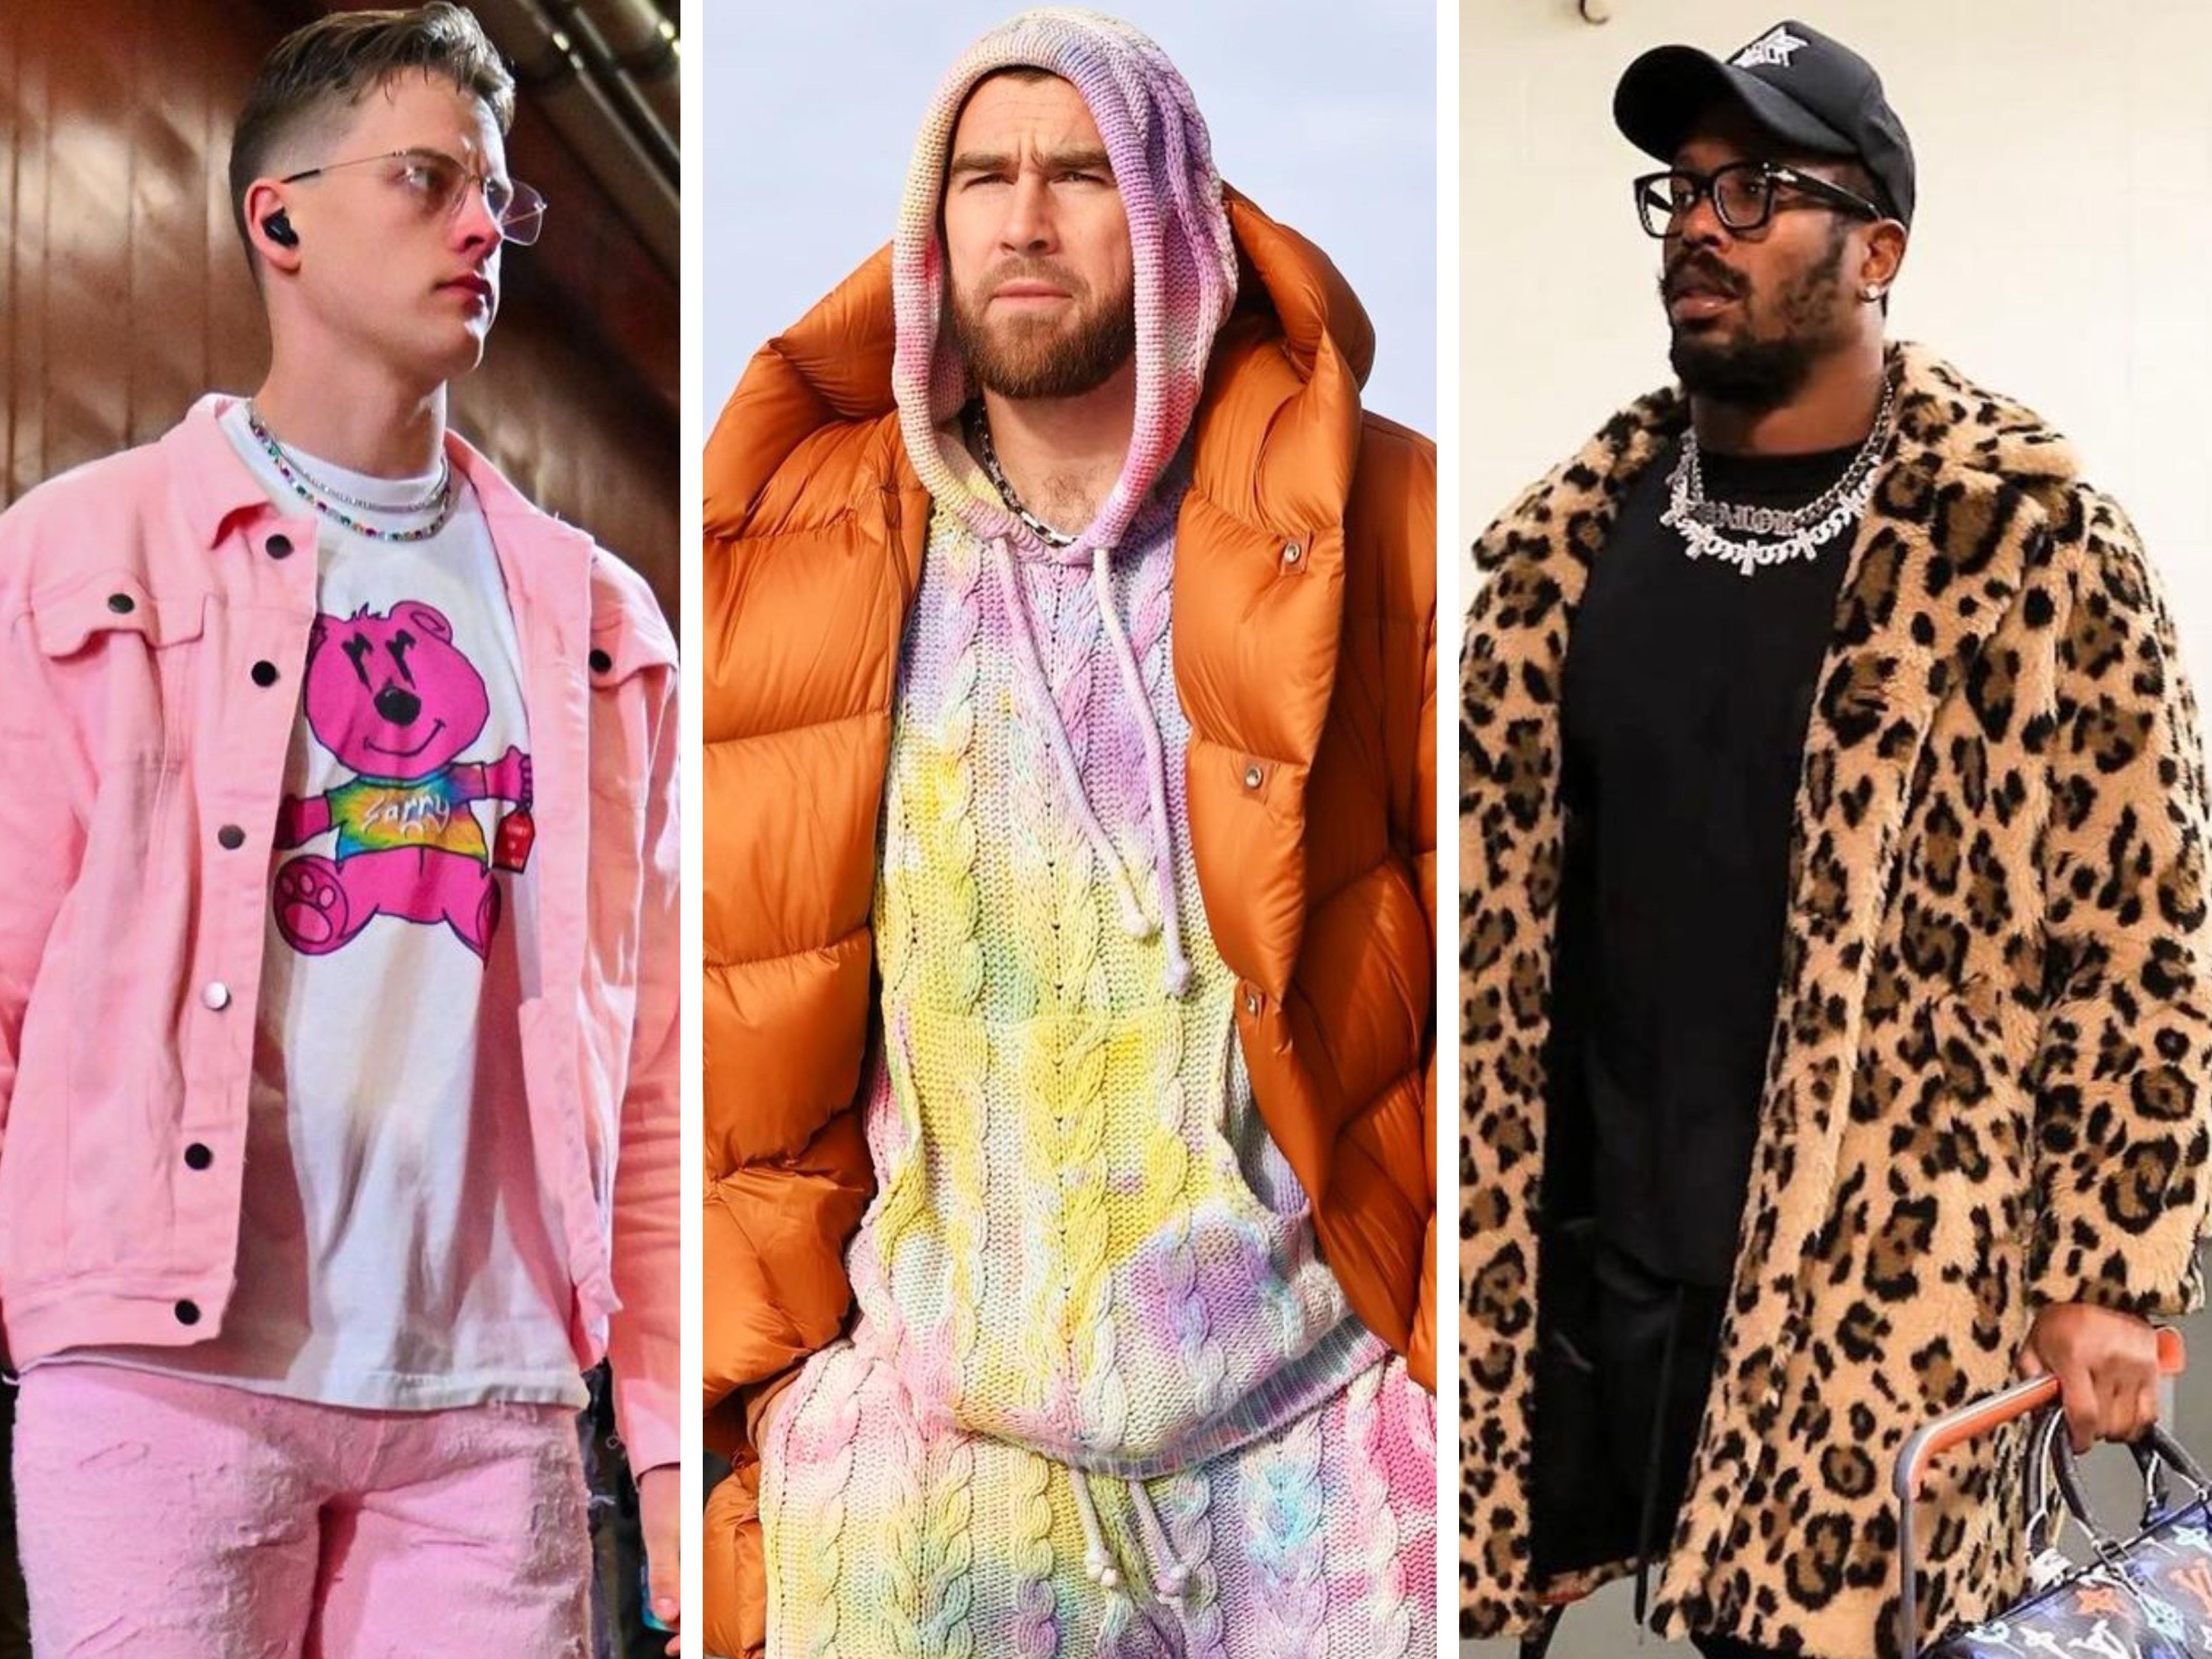 Style and NFL can go hand in hand ... Joe Burrow made a pair of Cartier sunglasses hip; Travis Kelce has his own athleisure brand and Von Miller has a 2,000 sq ft wardrobe. Photos: @bengals, @killatrav, @chandra26/Instagram